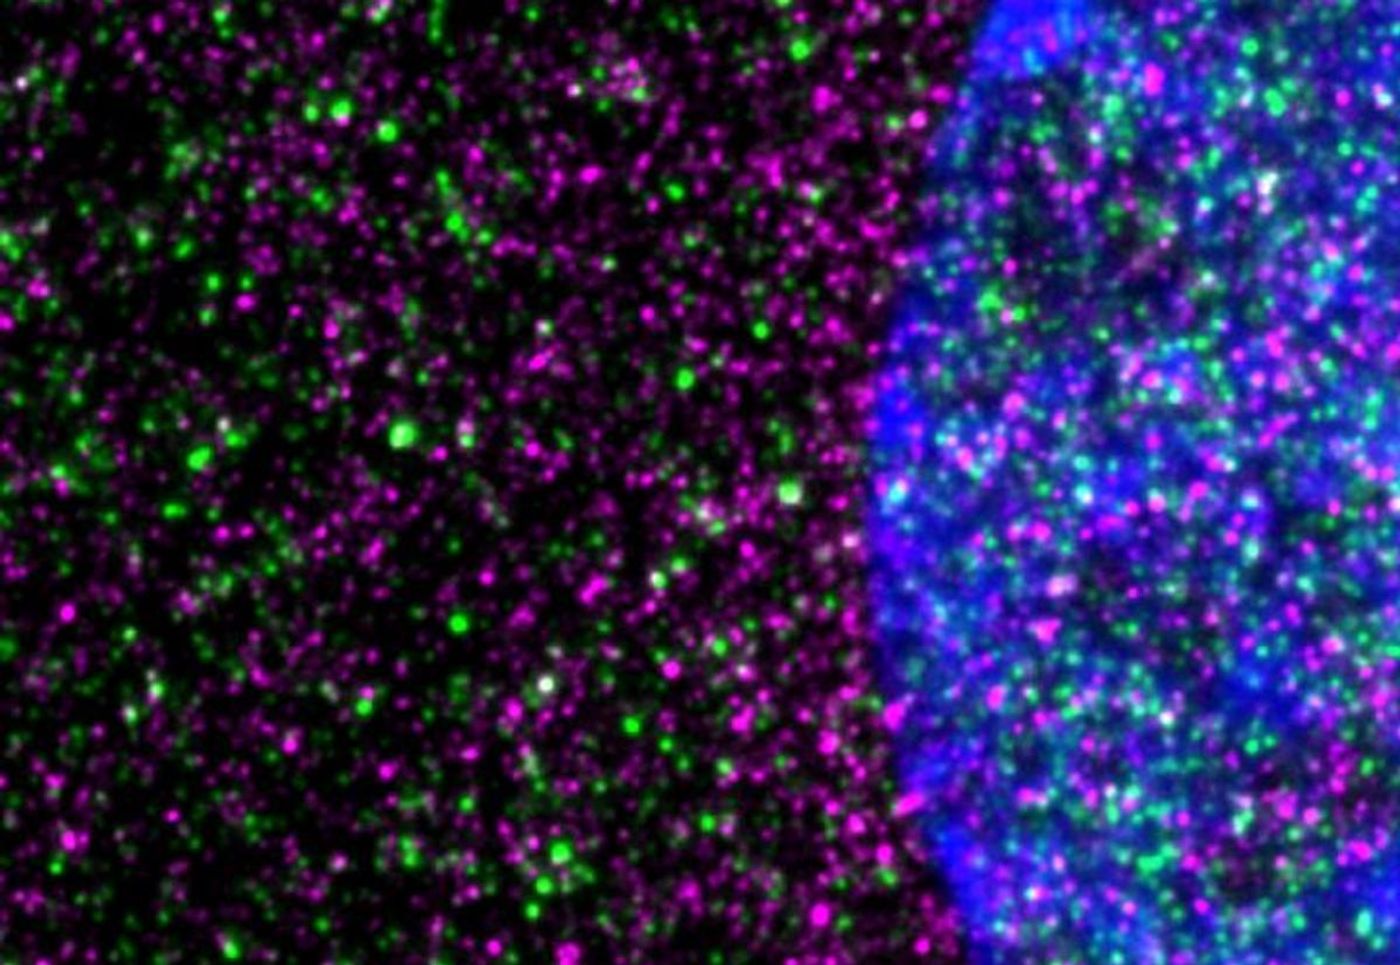 Disease-causing huntingtin, shown in red, interacts with ribosomes, shown in green, in a striatal neuron. The nucleus is blue. Credit  Image by Nicolai Urban of Max Planck Institute for Neuroscience in Jupiter, Florida